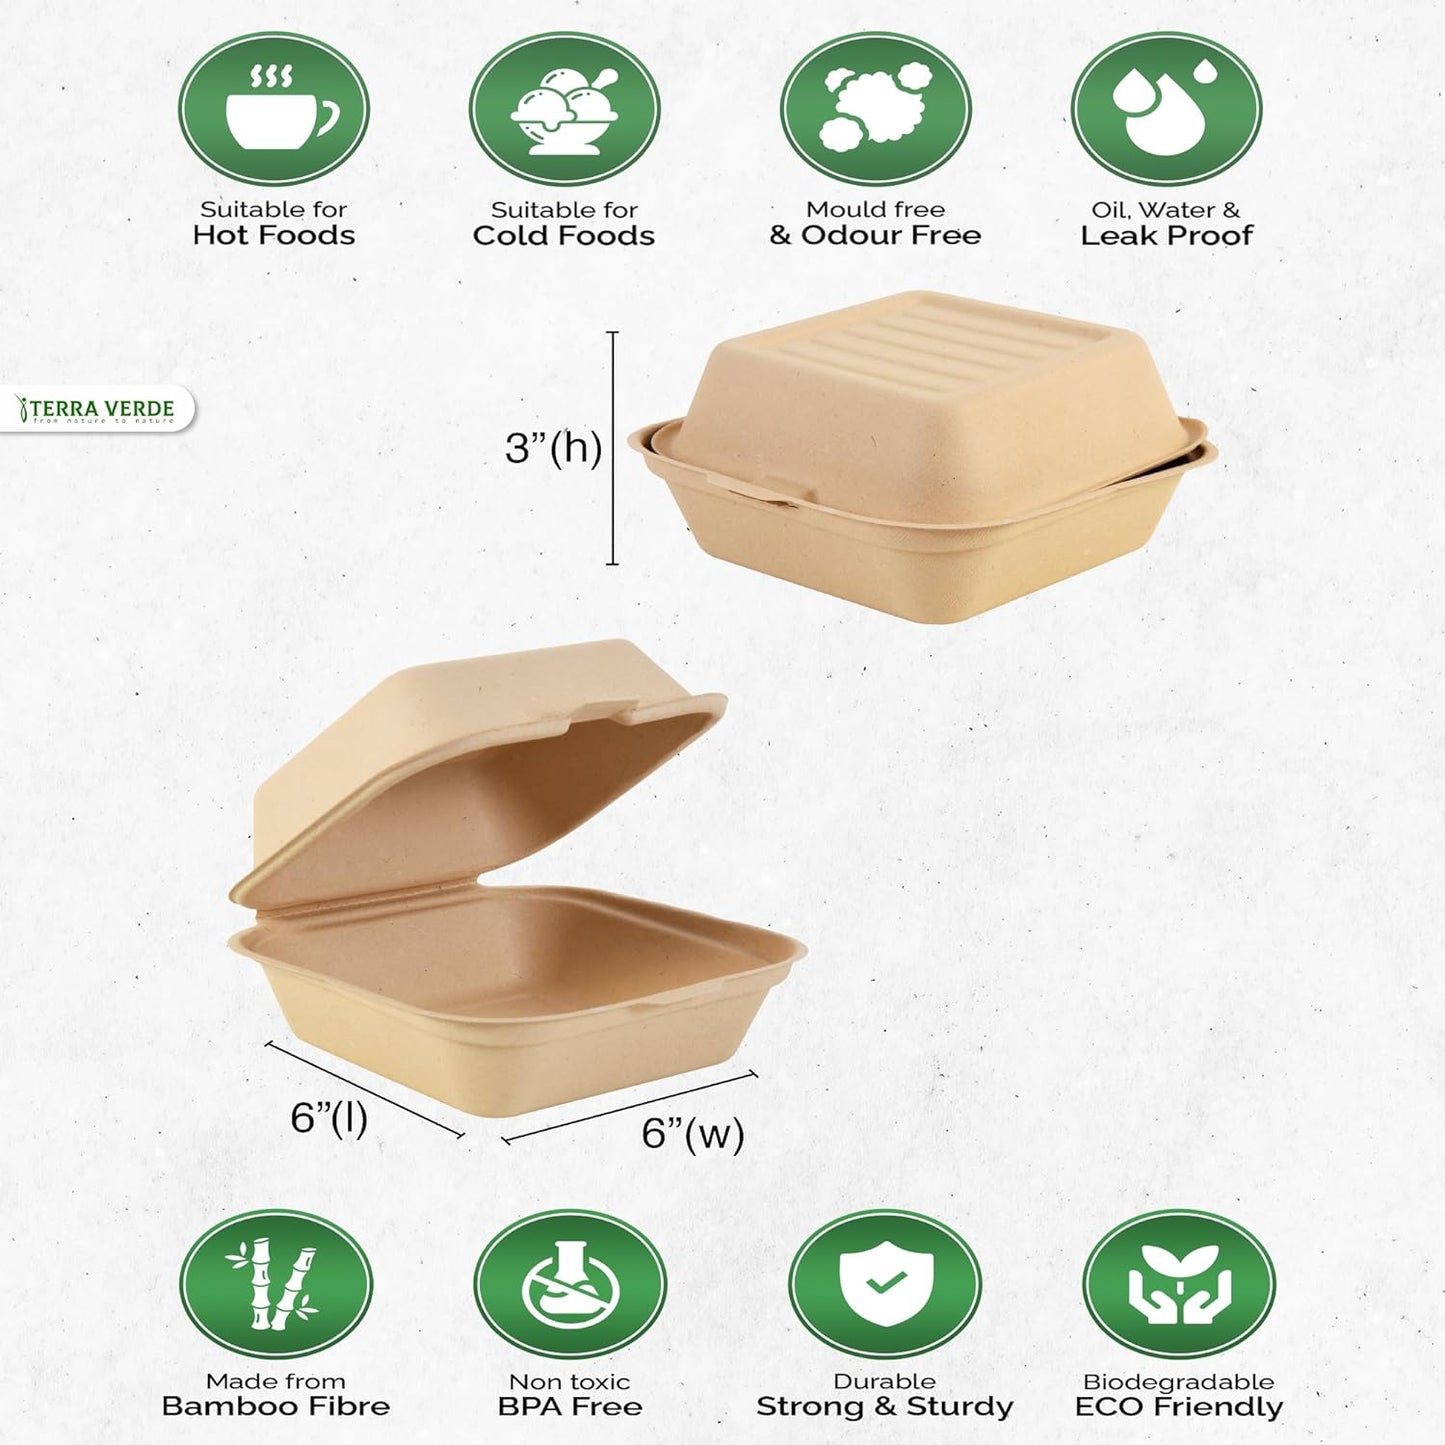 Disposable Bamboo Fibre Pulp Burger Clamshell 6x6inch Box Pack of 50  uses and benefits